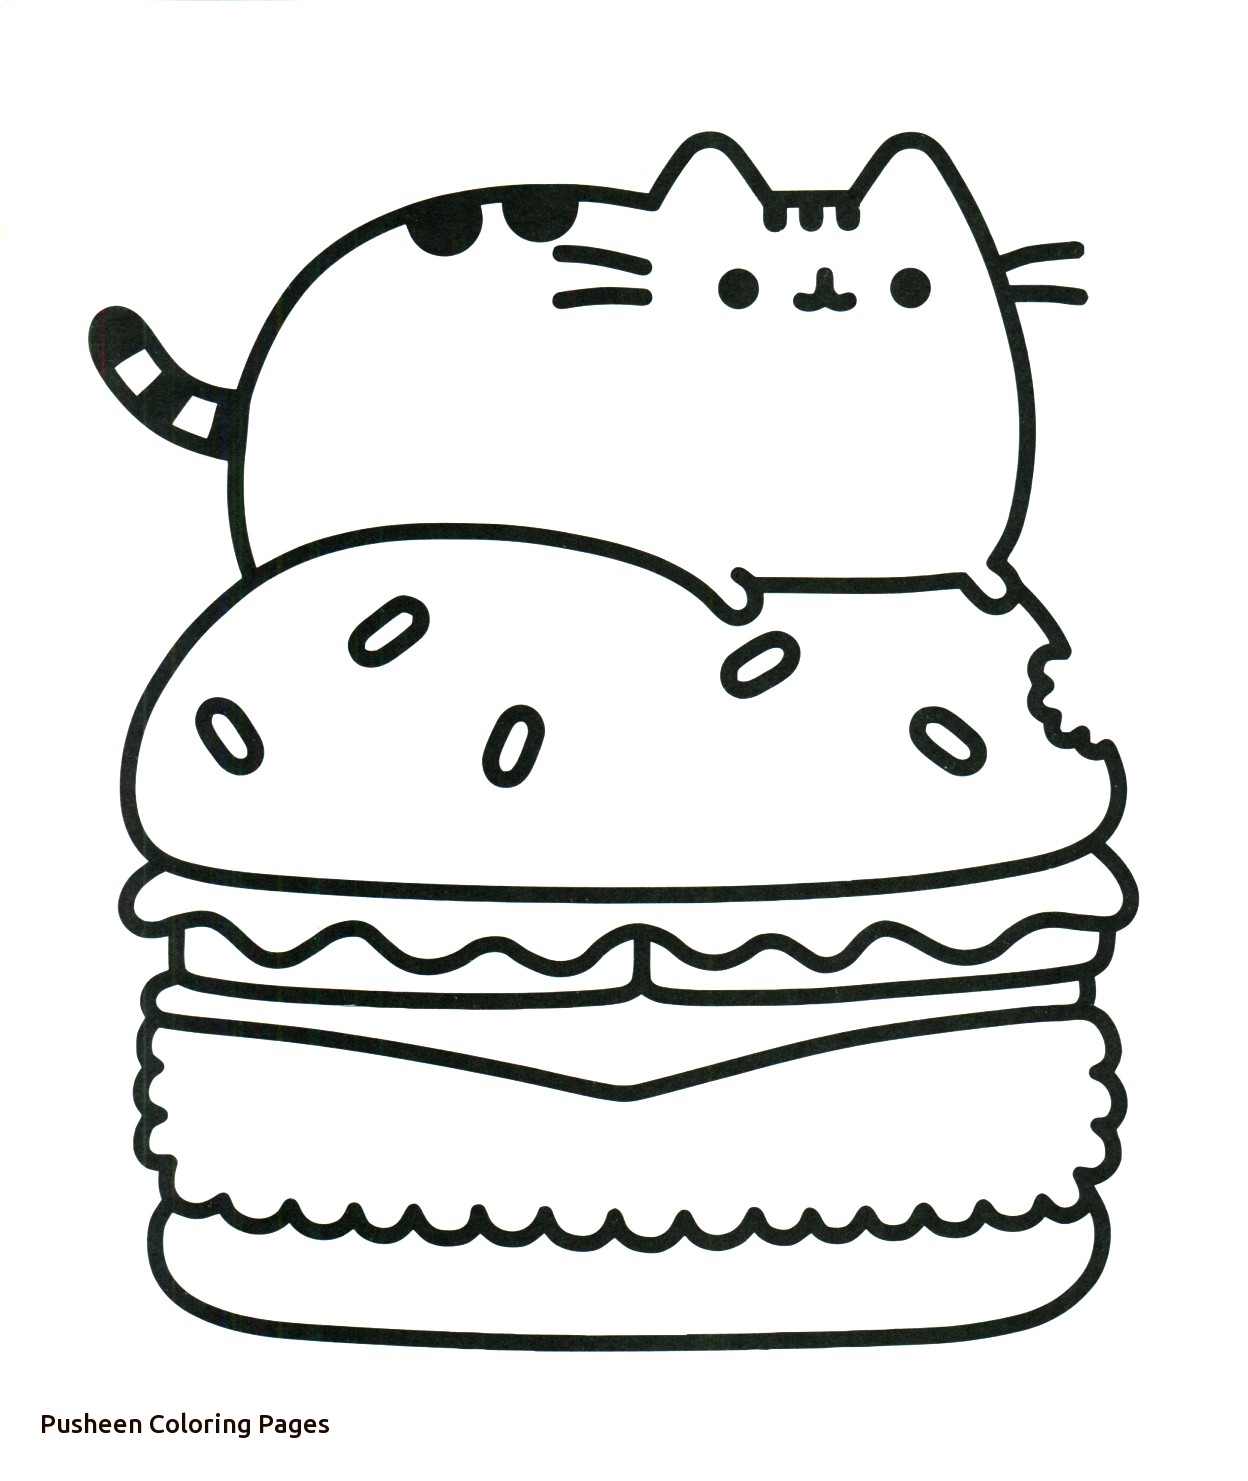 Cool Pusheen Cat 4 Coloring Page